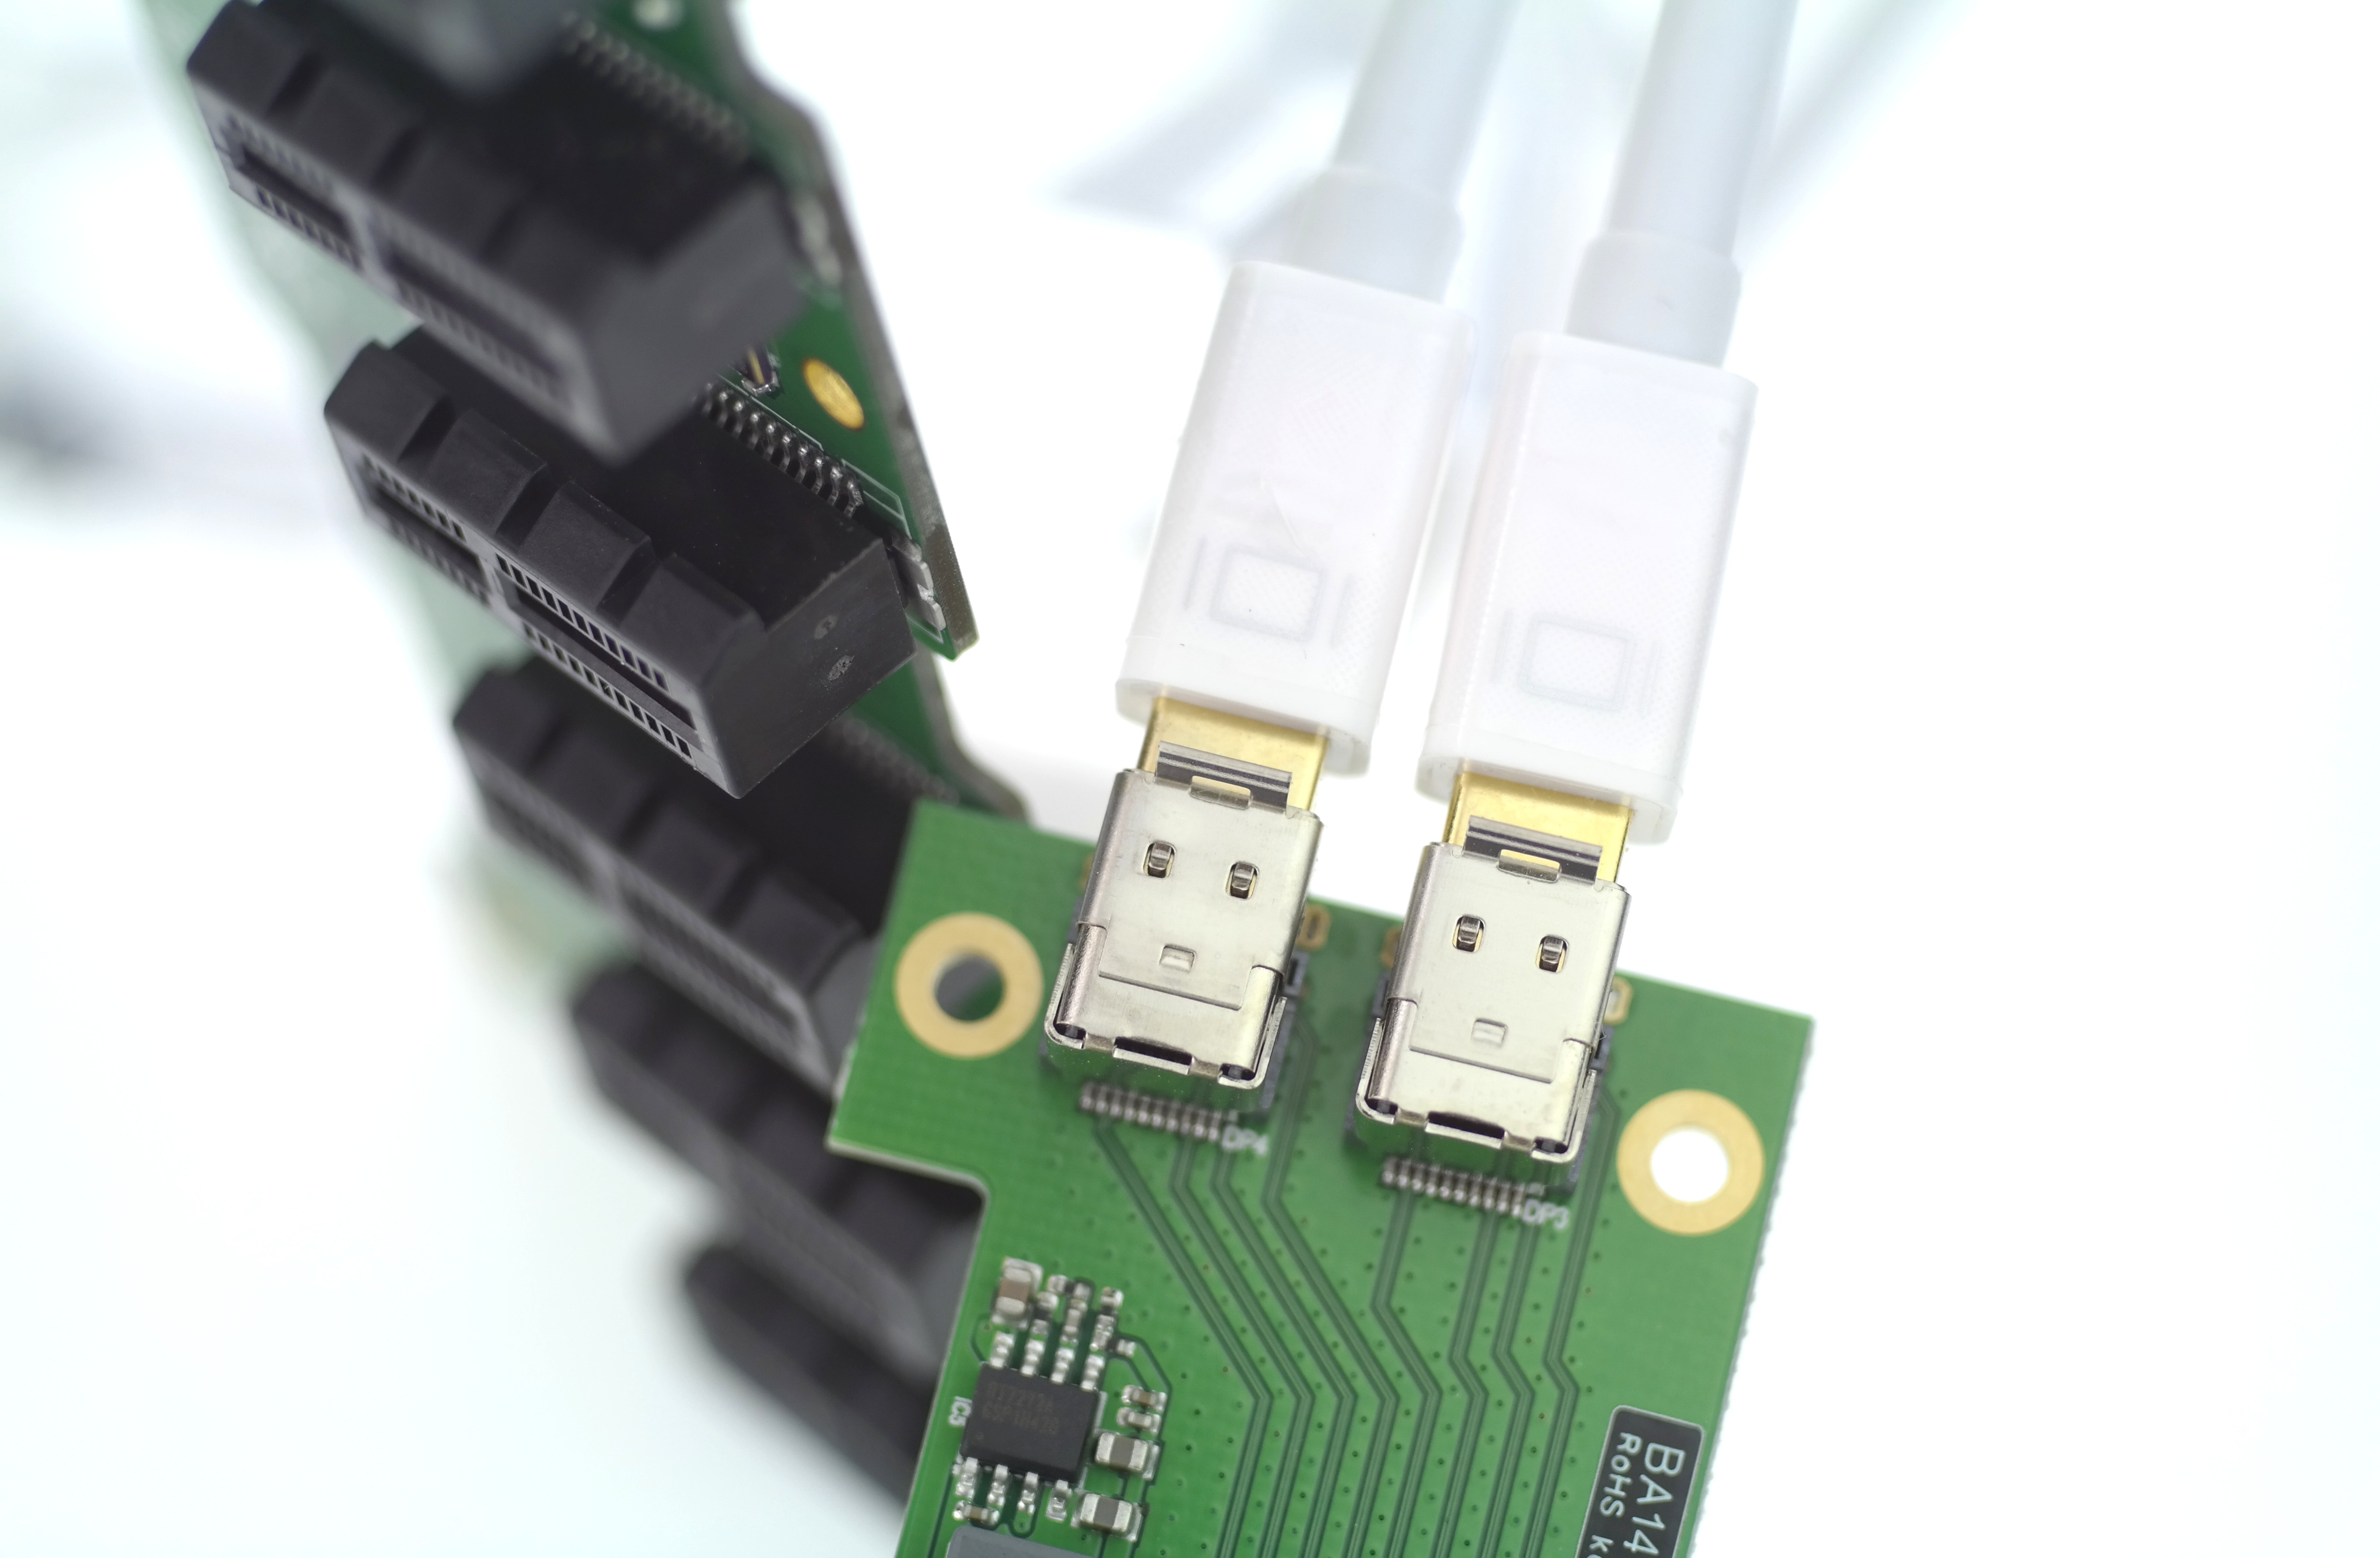 two plugin micro usb cables on green microchip